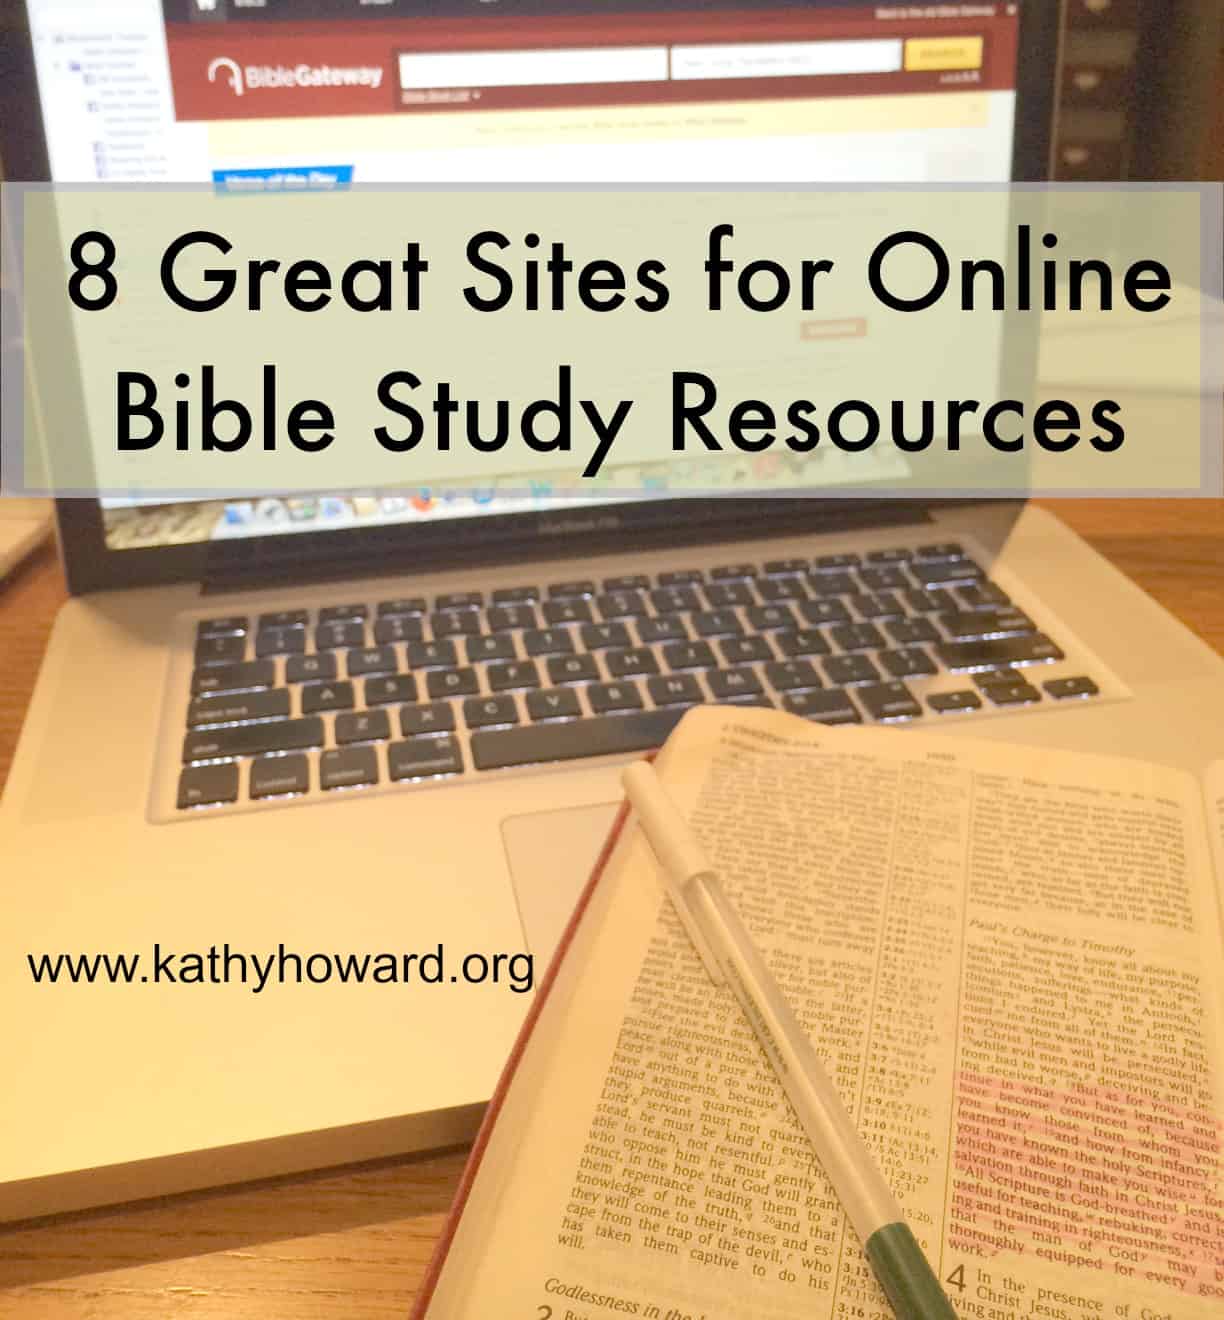 8 Sites that Offer Great Bible Study Resources